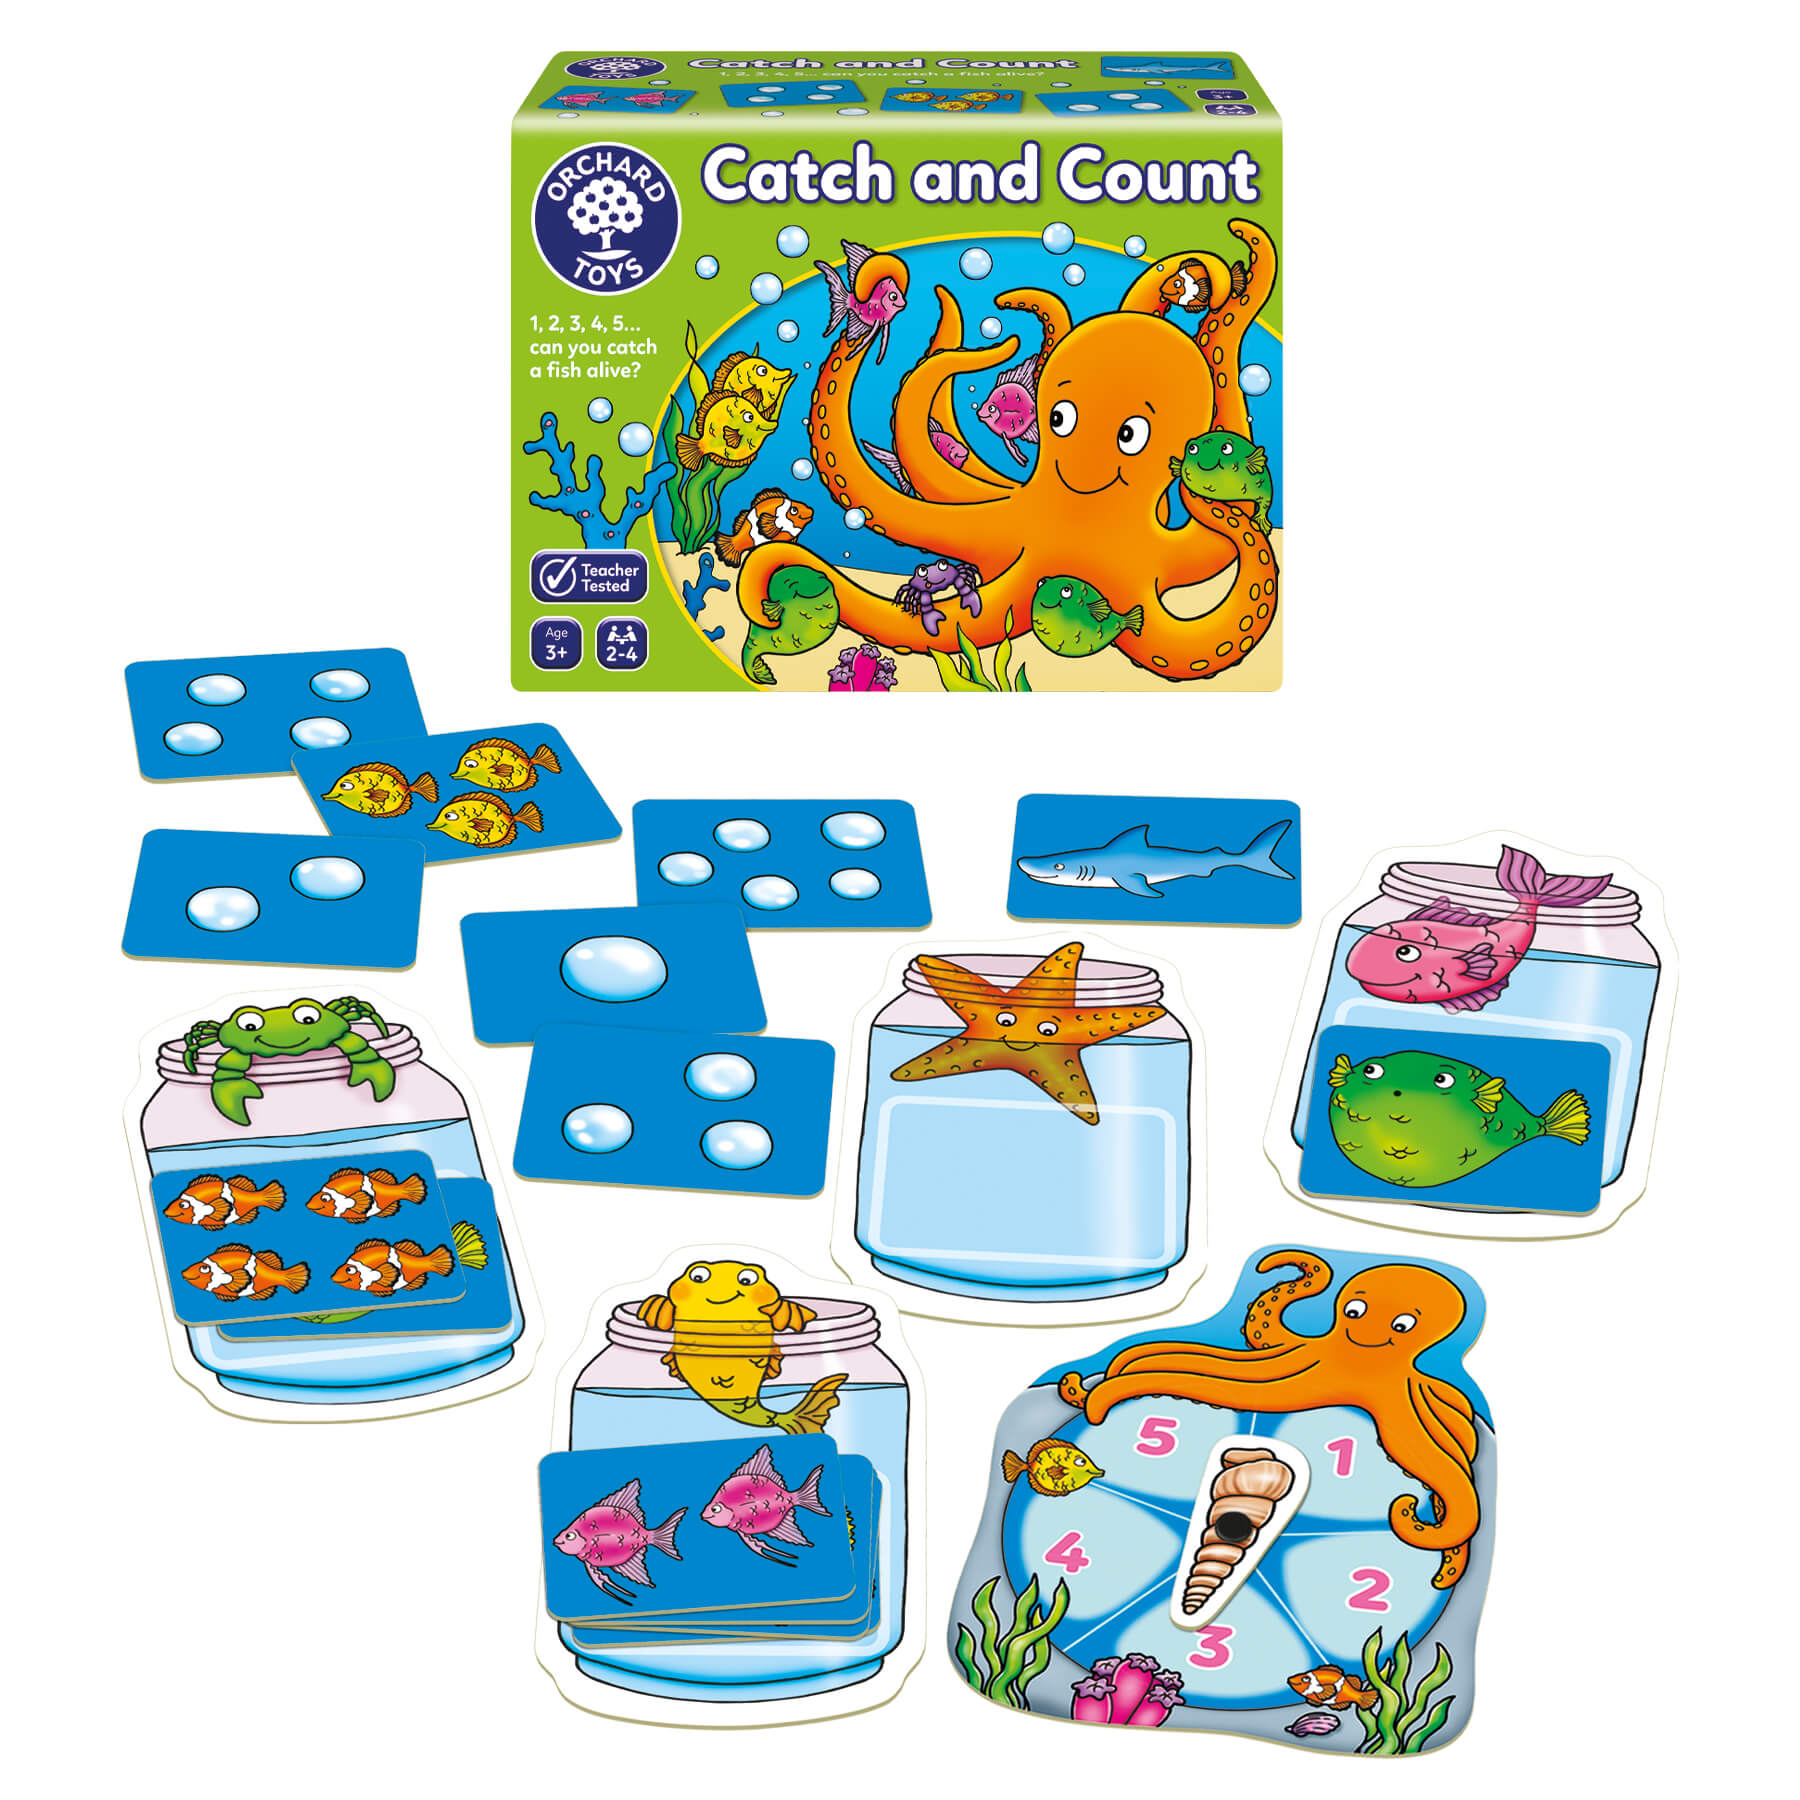 Product with Contents  - Catch and Count